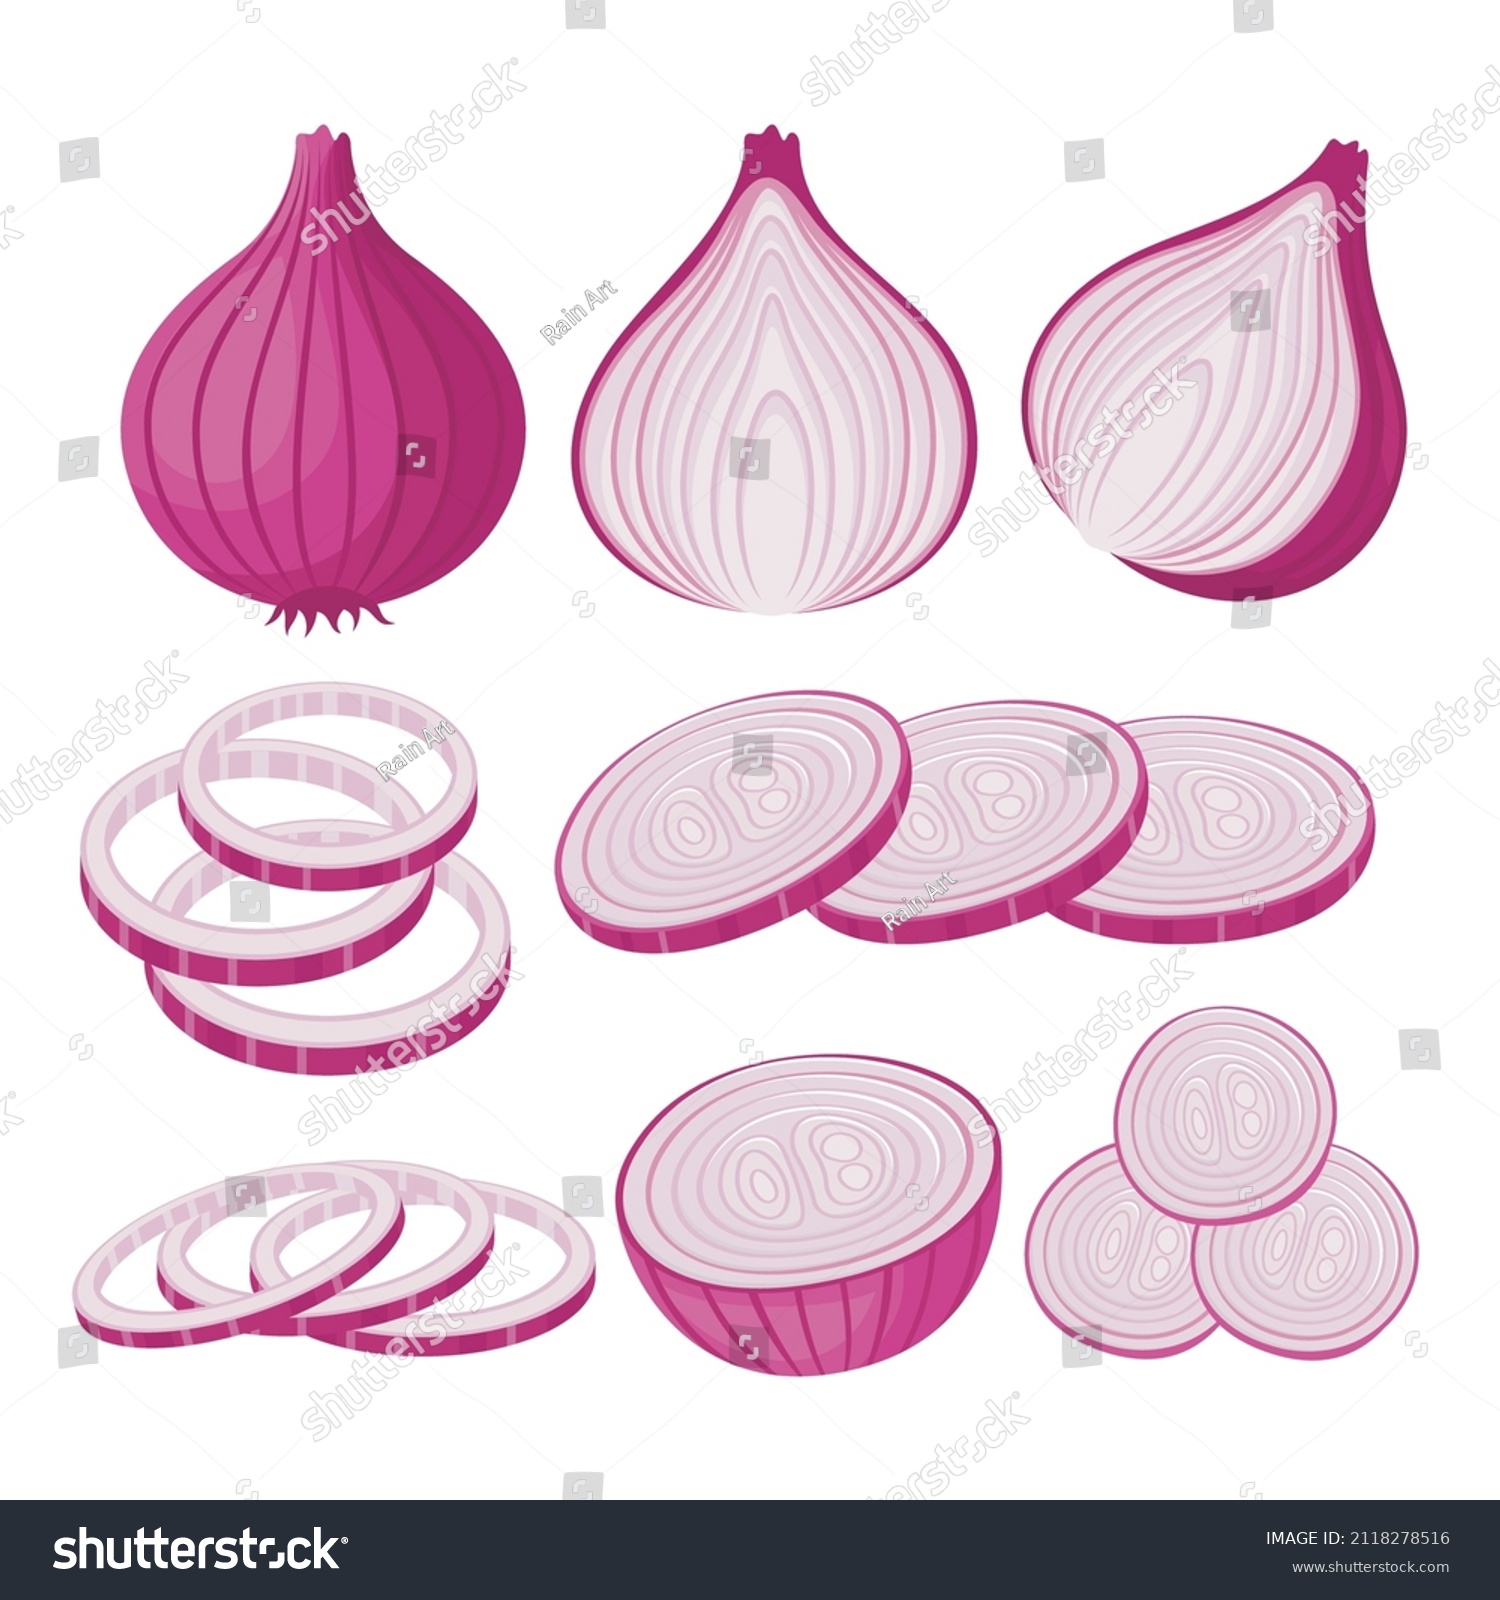 Collection of onion, whole onion, half onion and sliced onion #2118278516